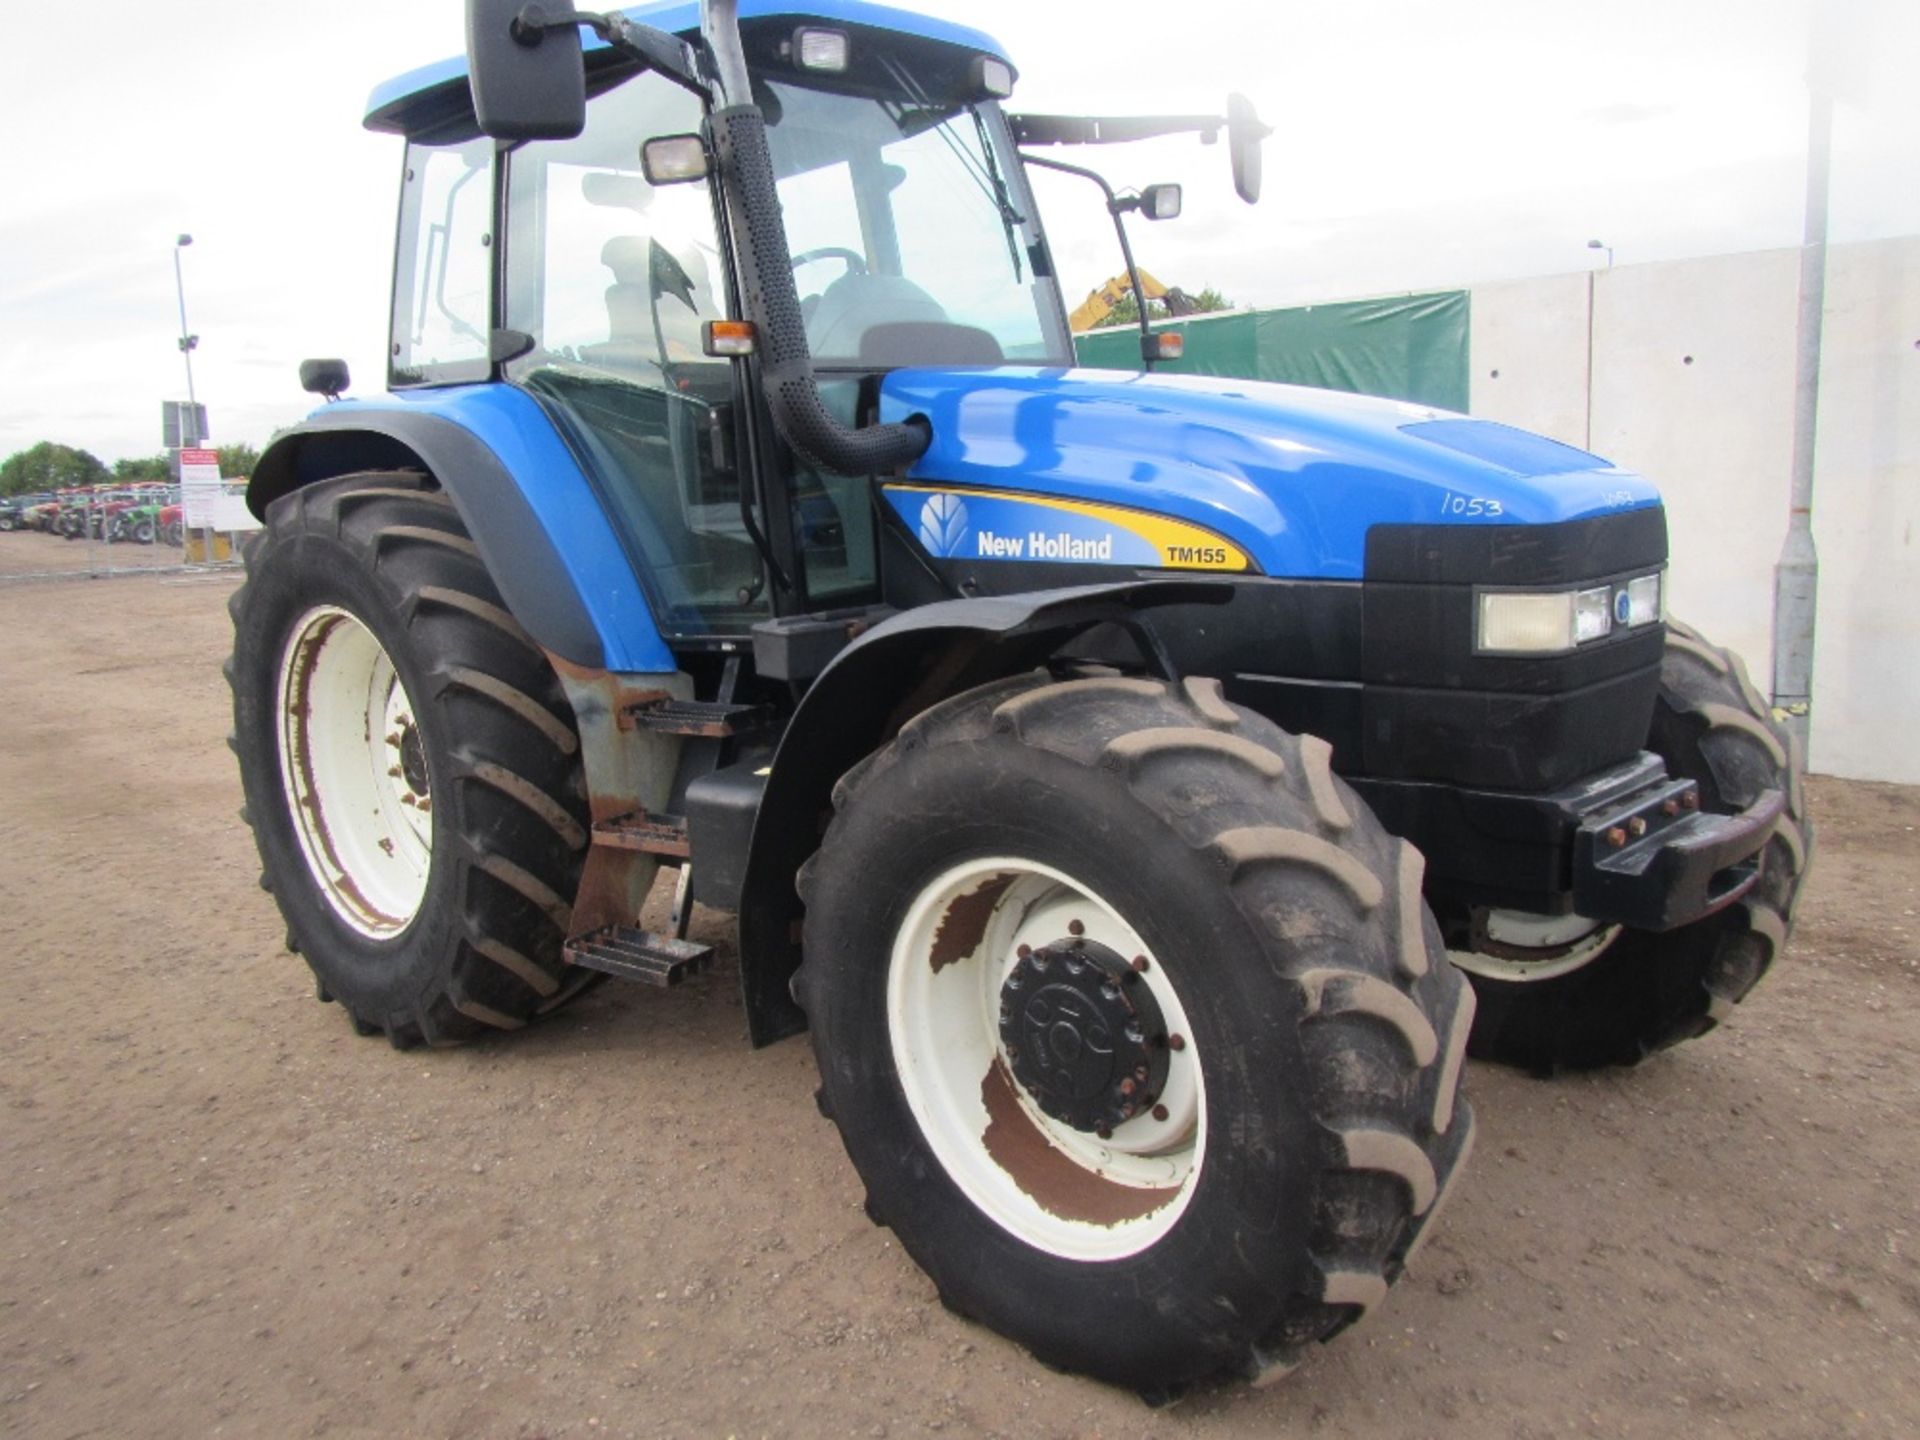 New Holland TM155 Tractor with Cab Suspension, Air Con & Air Seat. Reg. No. HX04 PVE. - Image 3 of 16